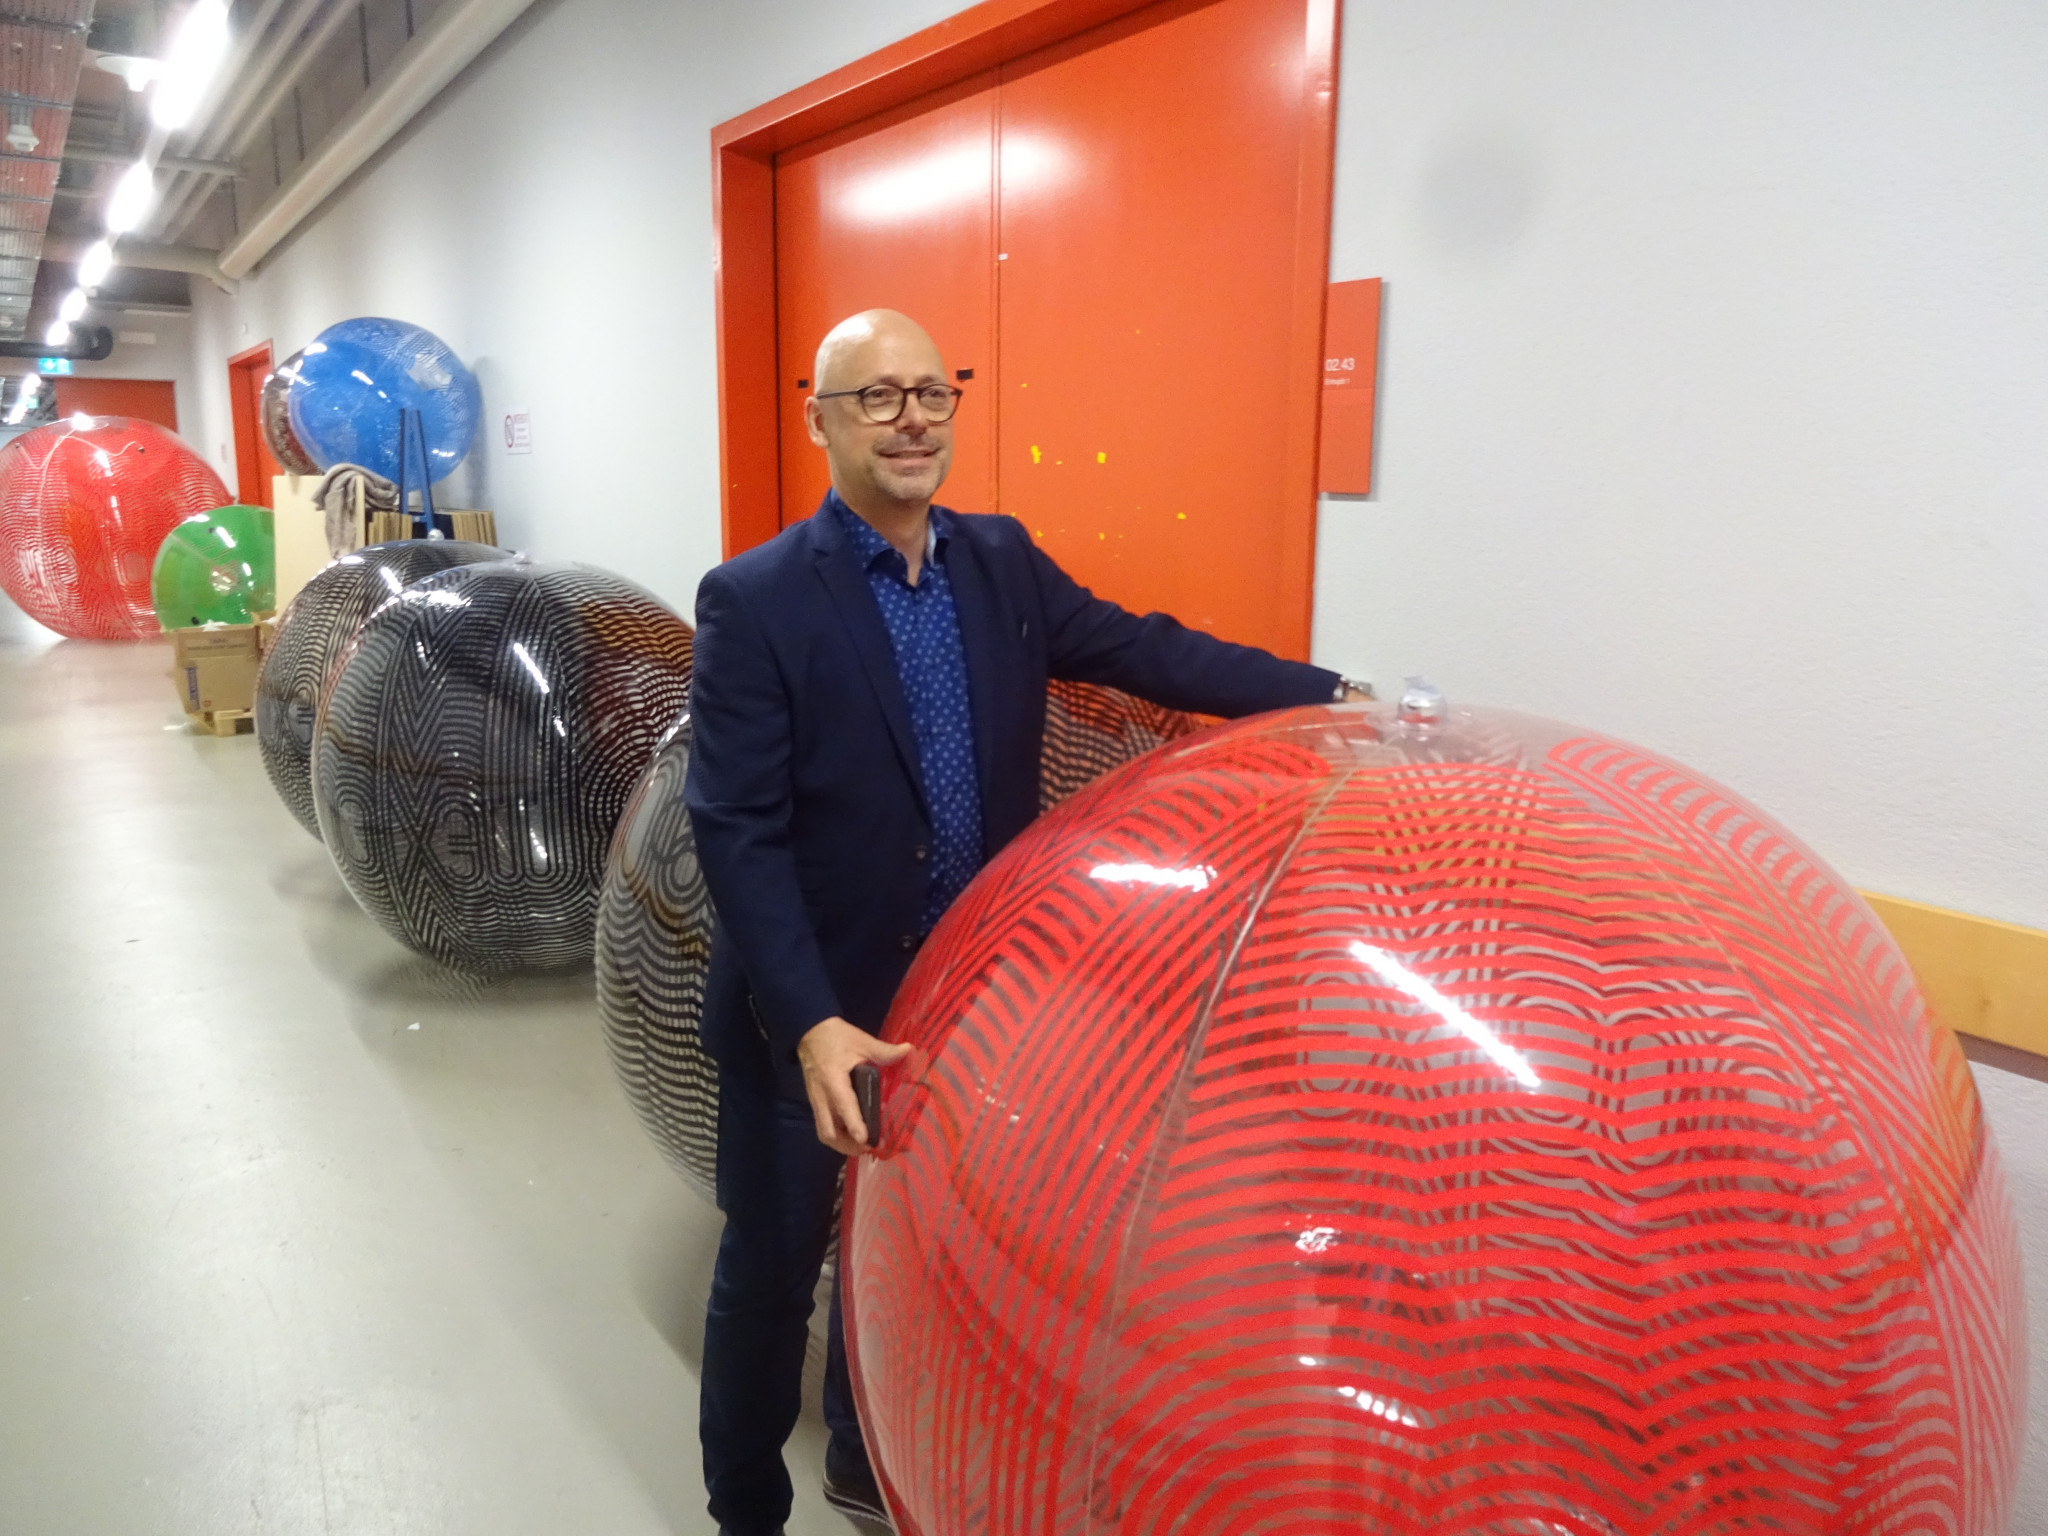 Curator Markus Osterwalder with a giant ball from Mexico 1968 before it was installed in the exhibition ©Philip Barker